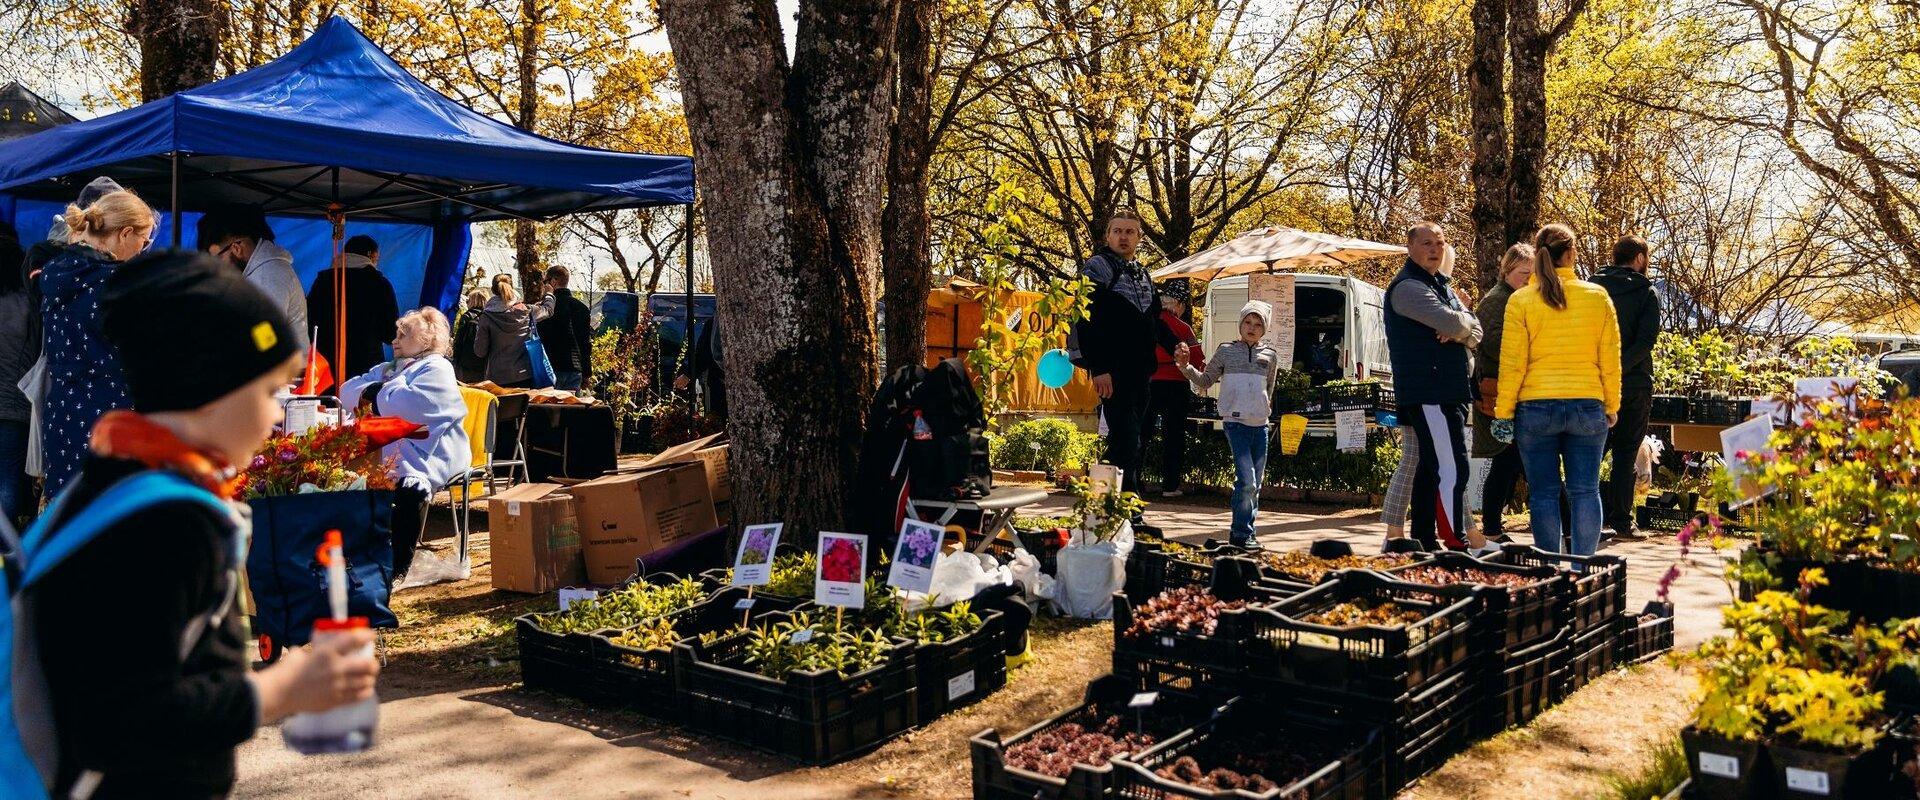 As it has for decades, the start of the peak season of spring gardening in Estonia is marked by the Türi Flower Fair, held on the fields on Kalevi Str